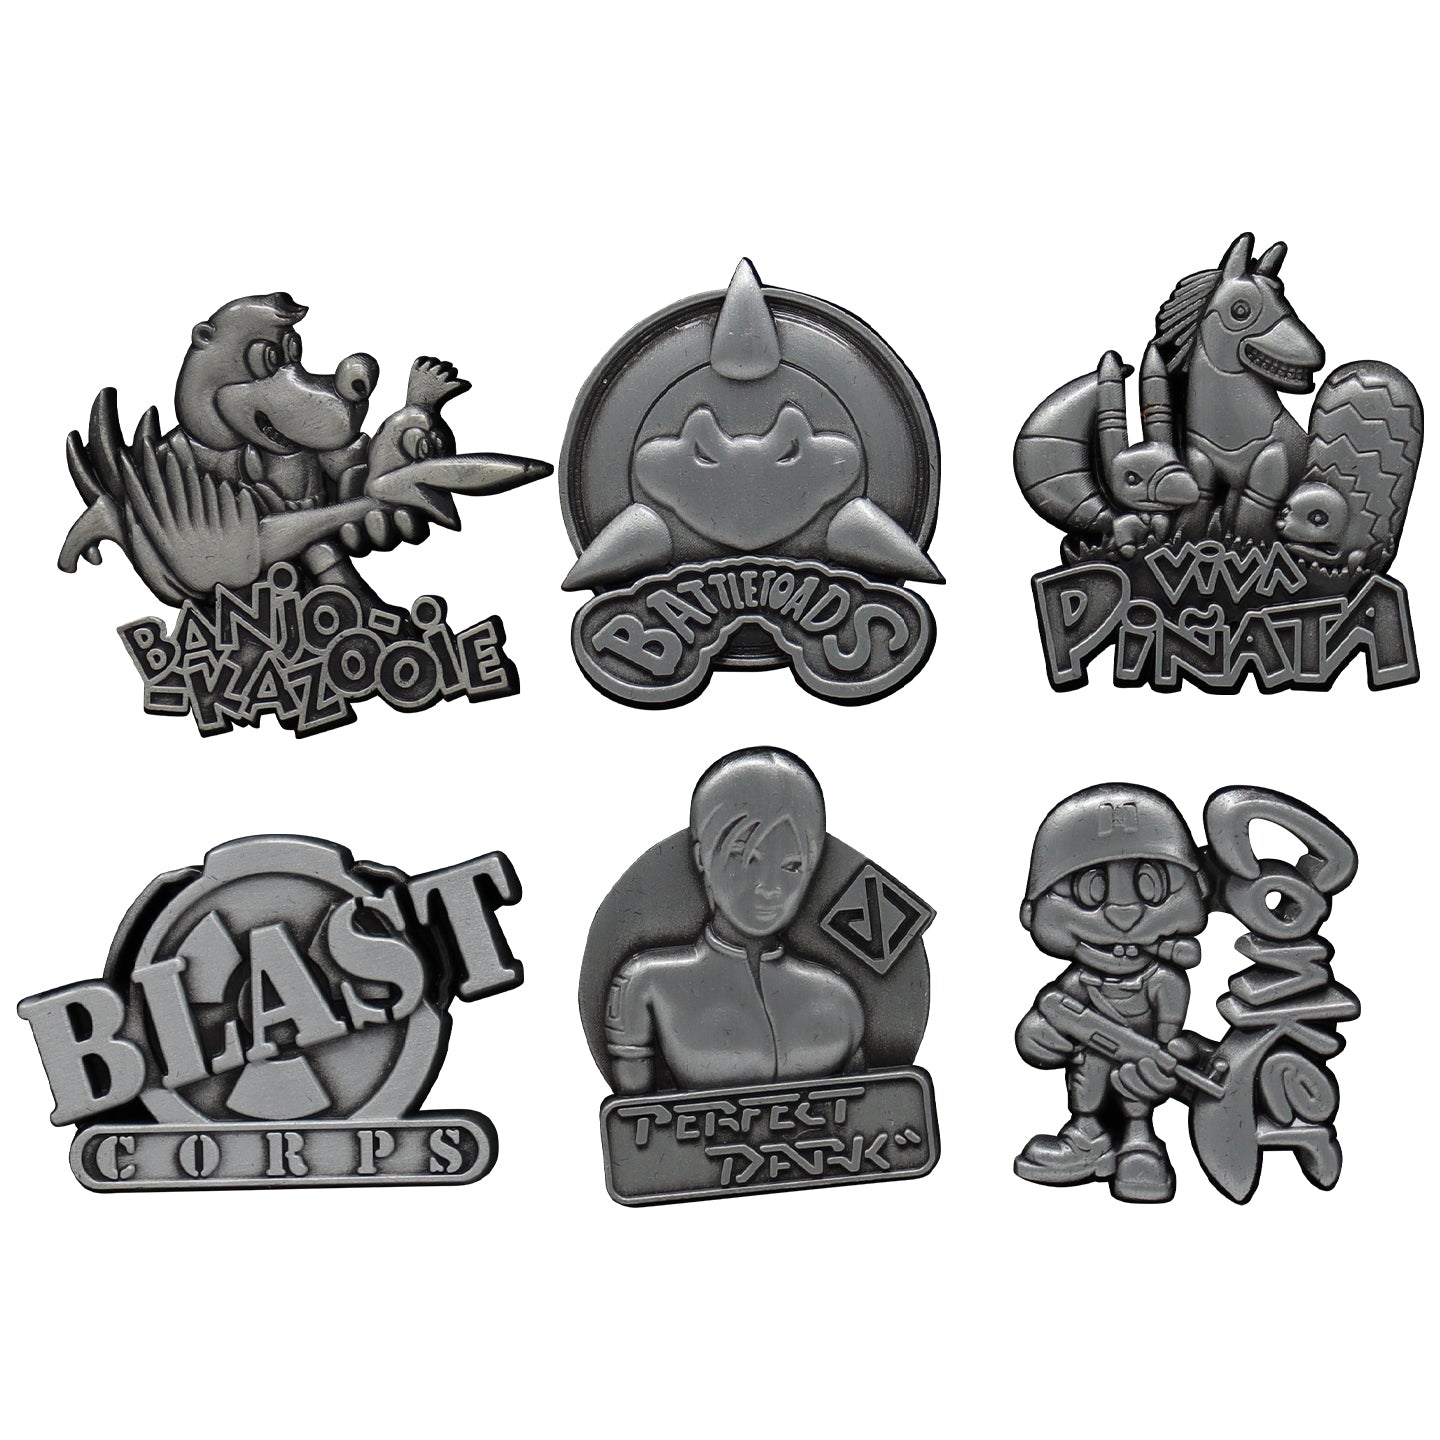 Rare Heritage Limited Edition Set of 6 Pin Badges